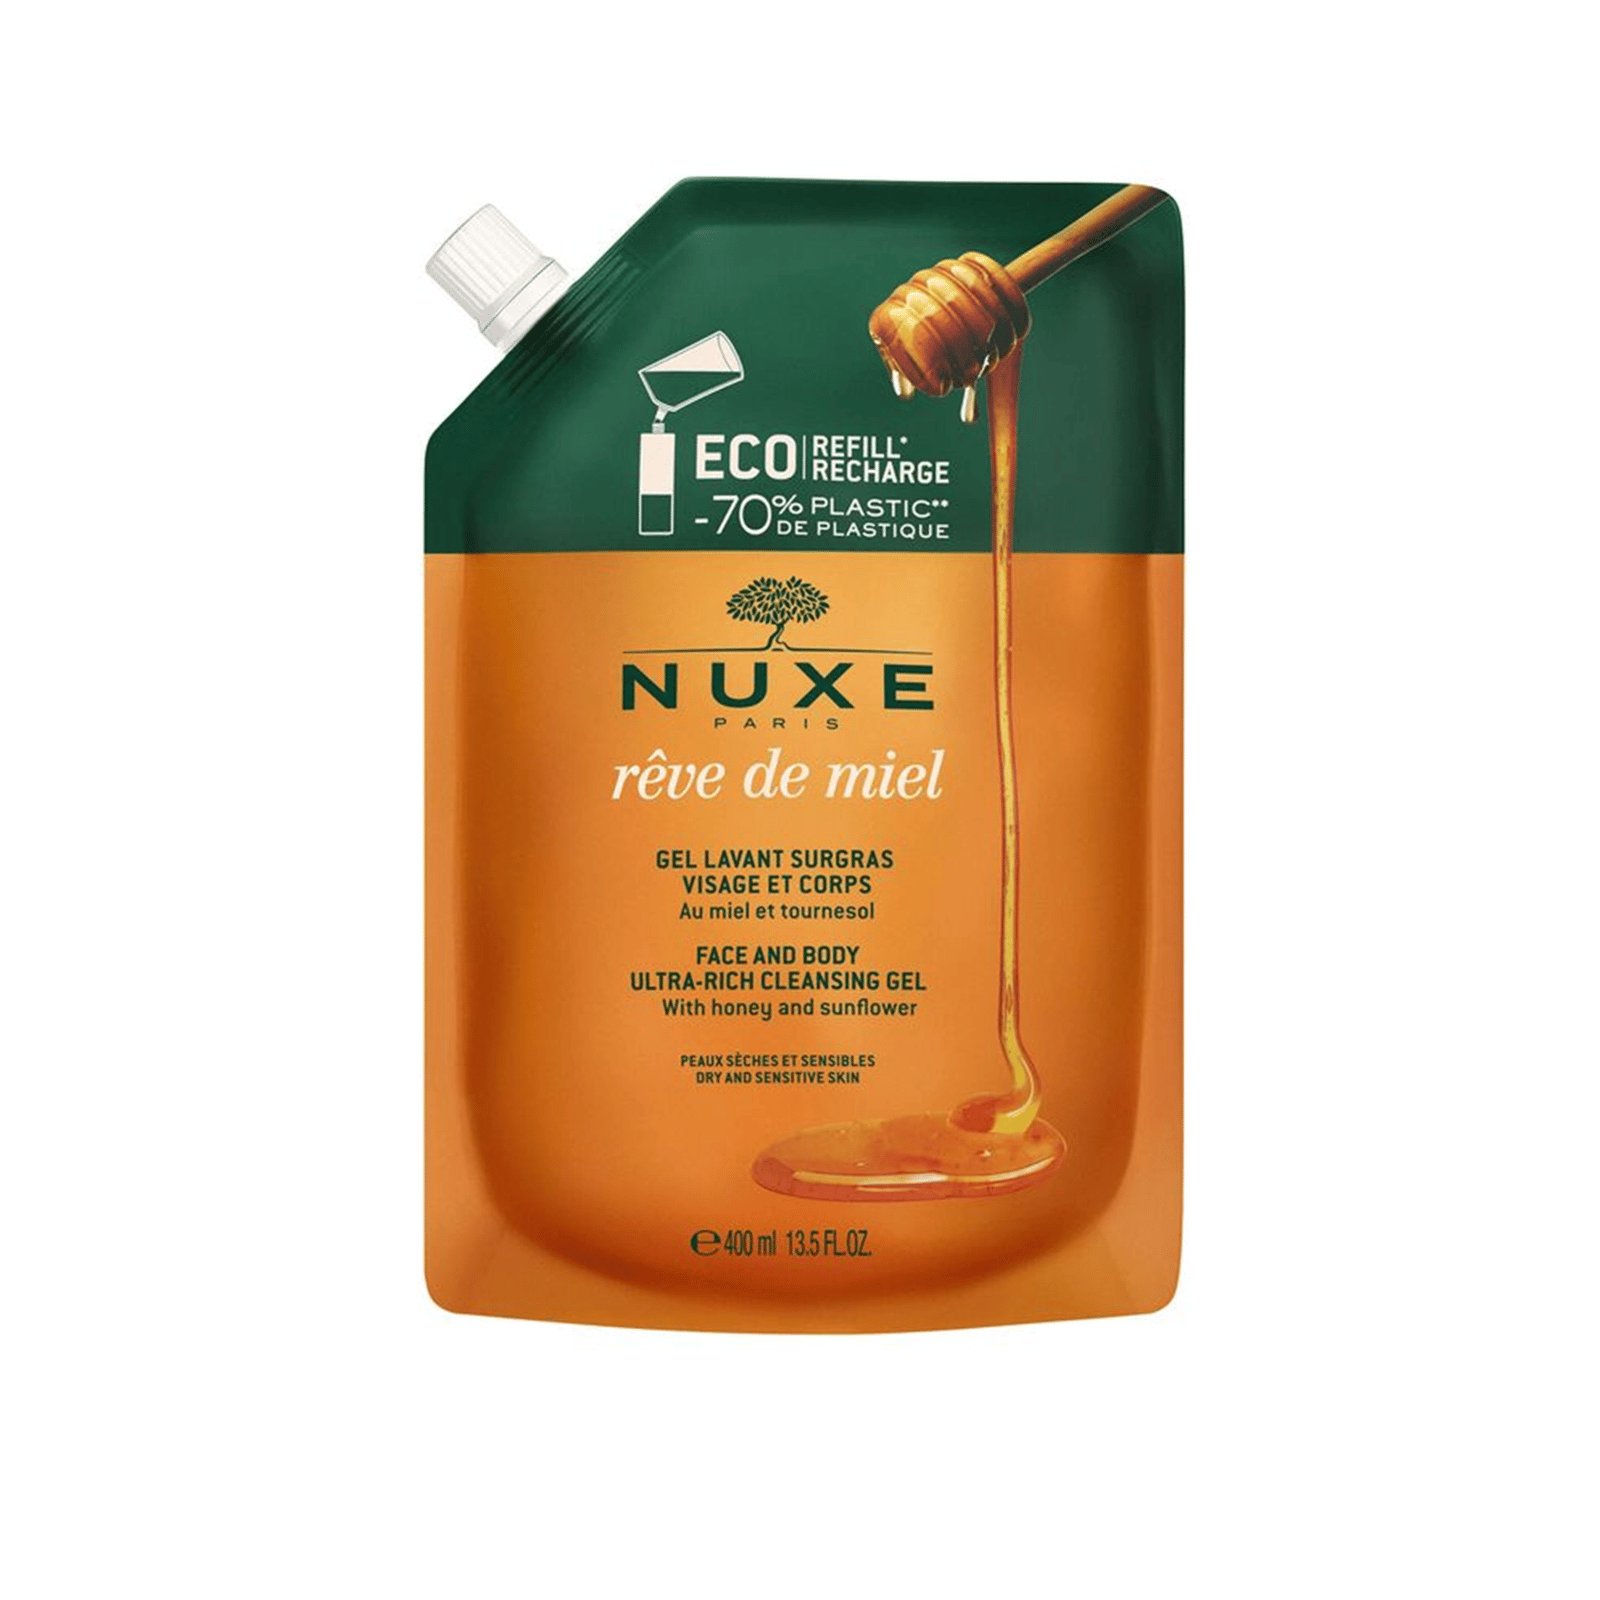 NUXE Rêve de Miel Face and Body Ultra-Rich Cleansing Gel Eco-Refill 400ml (13.5floz)